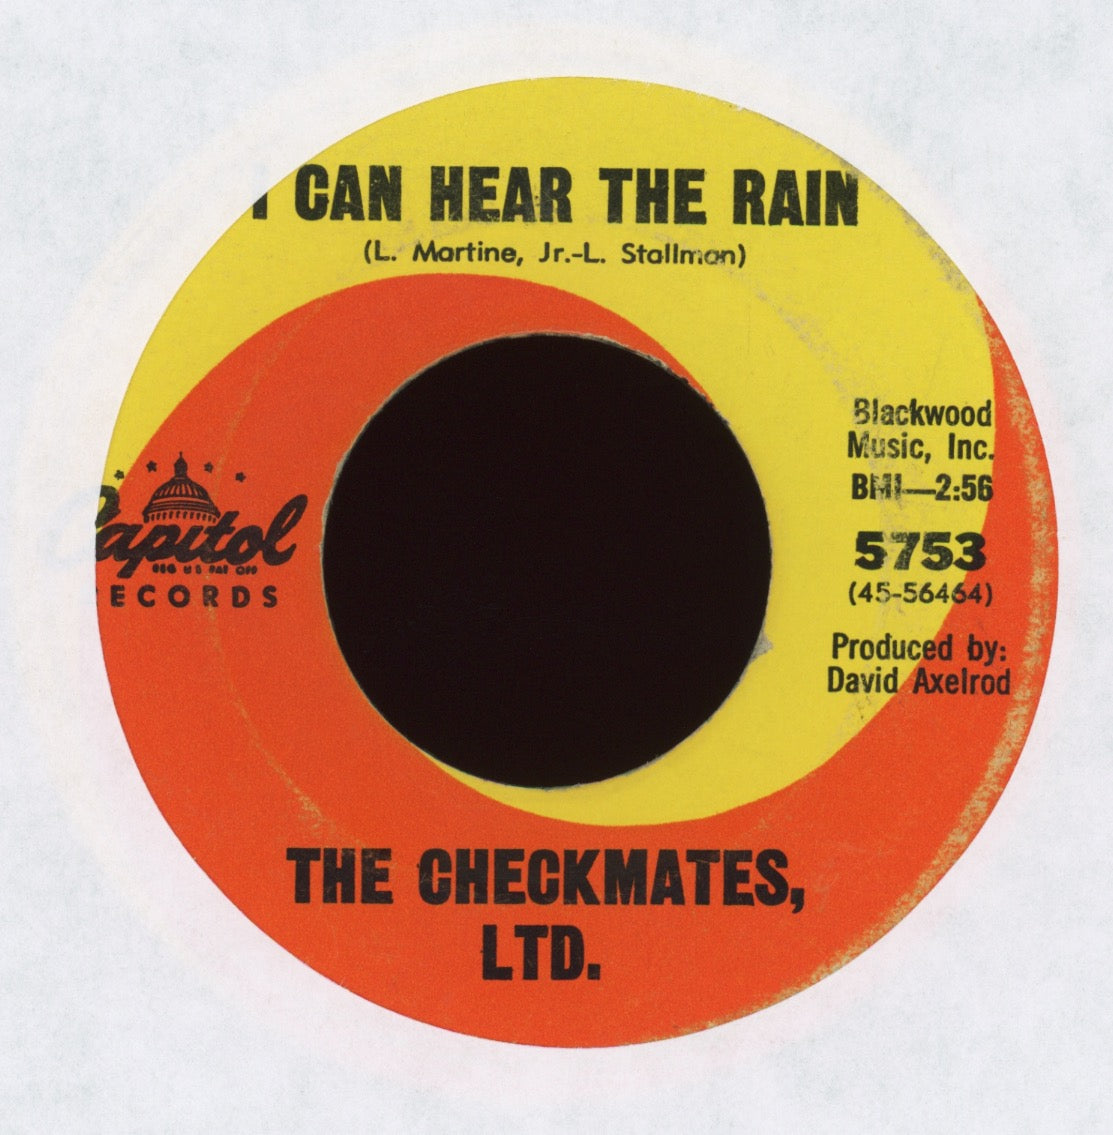 The Checkmates LTD. - Kissin' Her and Crying for You on Capitol